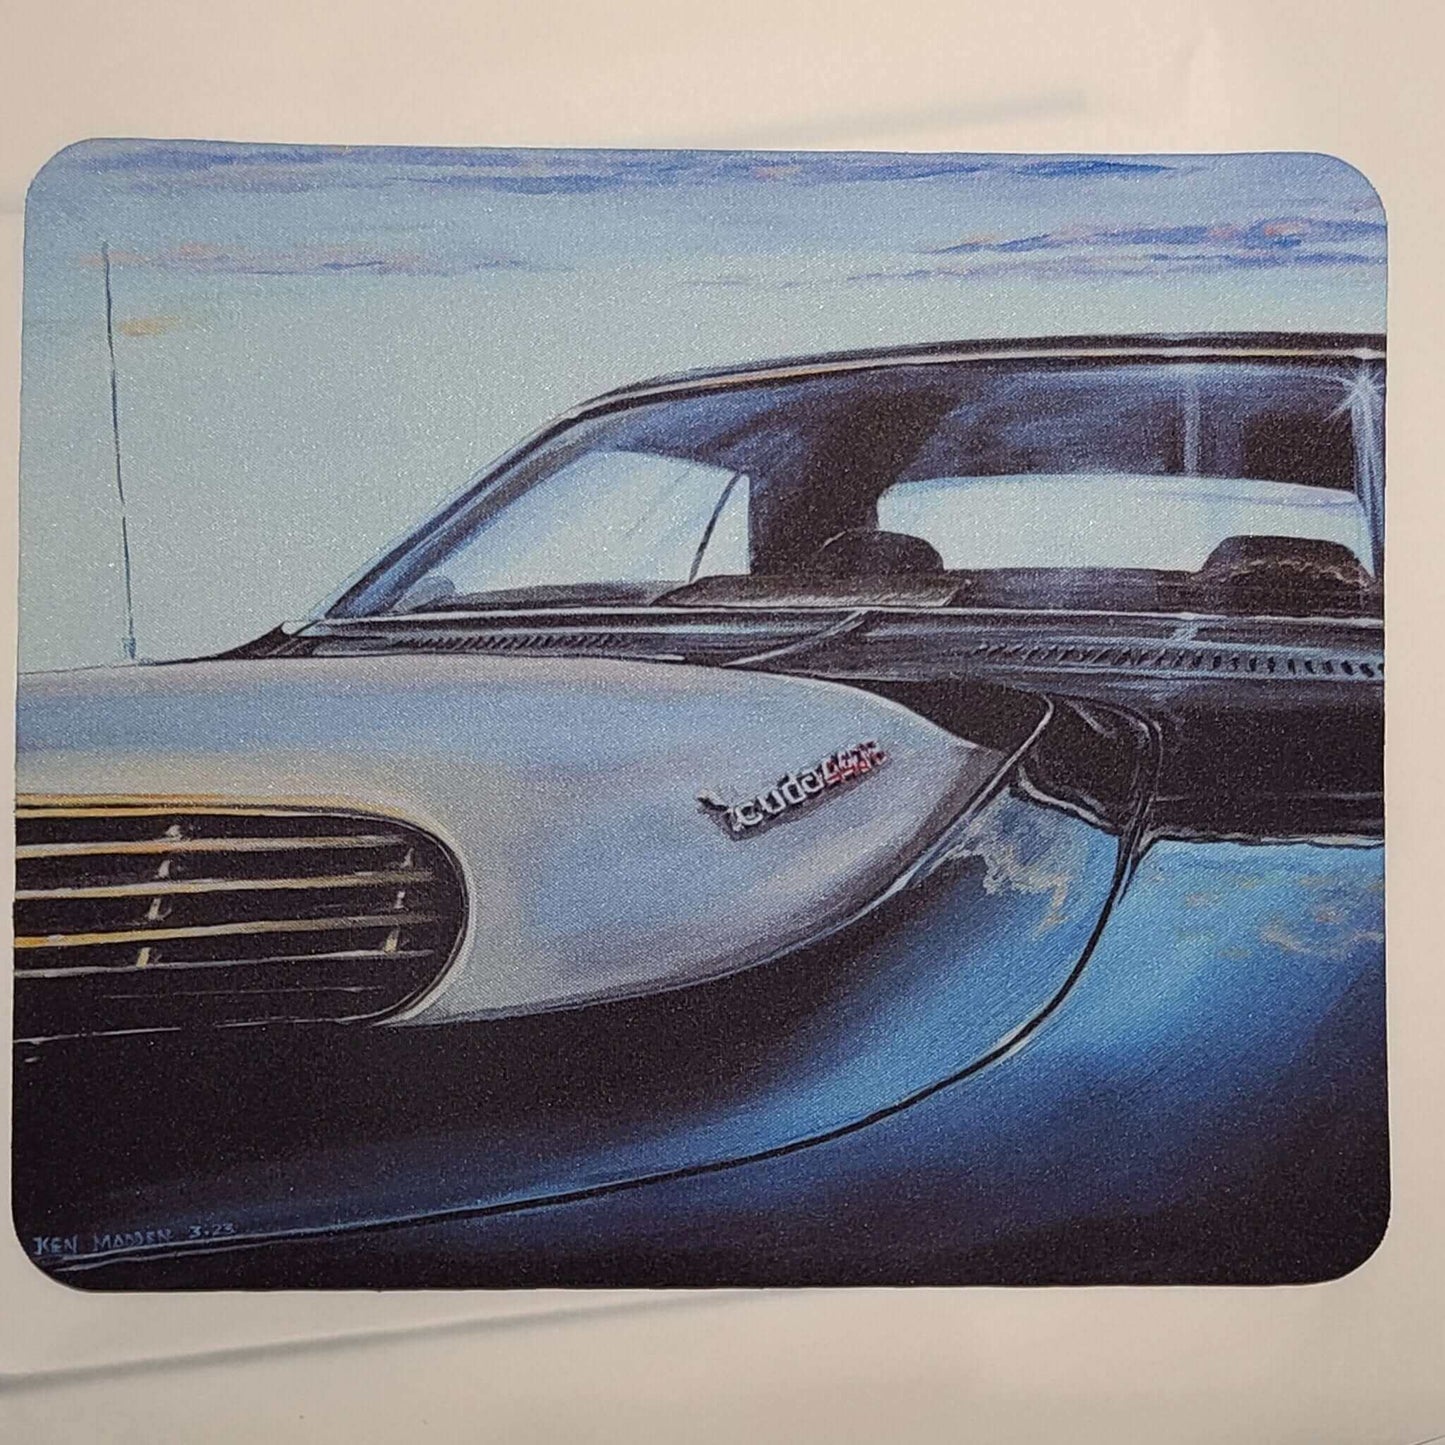 CUA 440 6 - Mouse pad 6 pack American Made american muscle CUDA 440 CUDA 440 6 pack made in america muscle car plymouth six pack